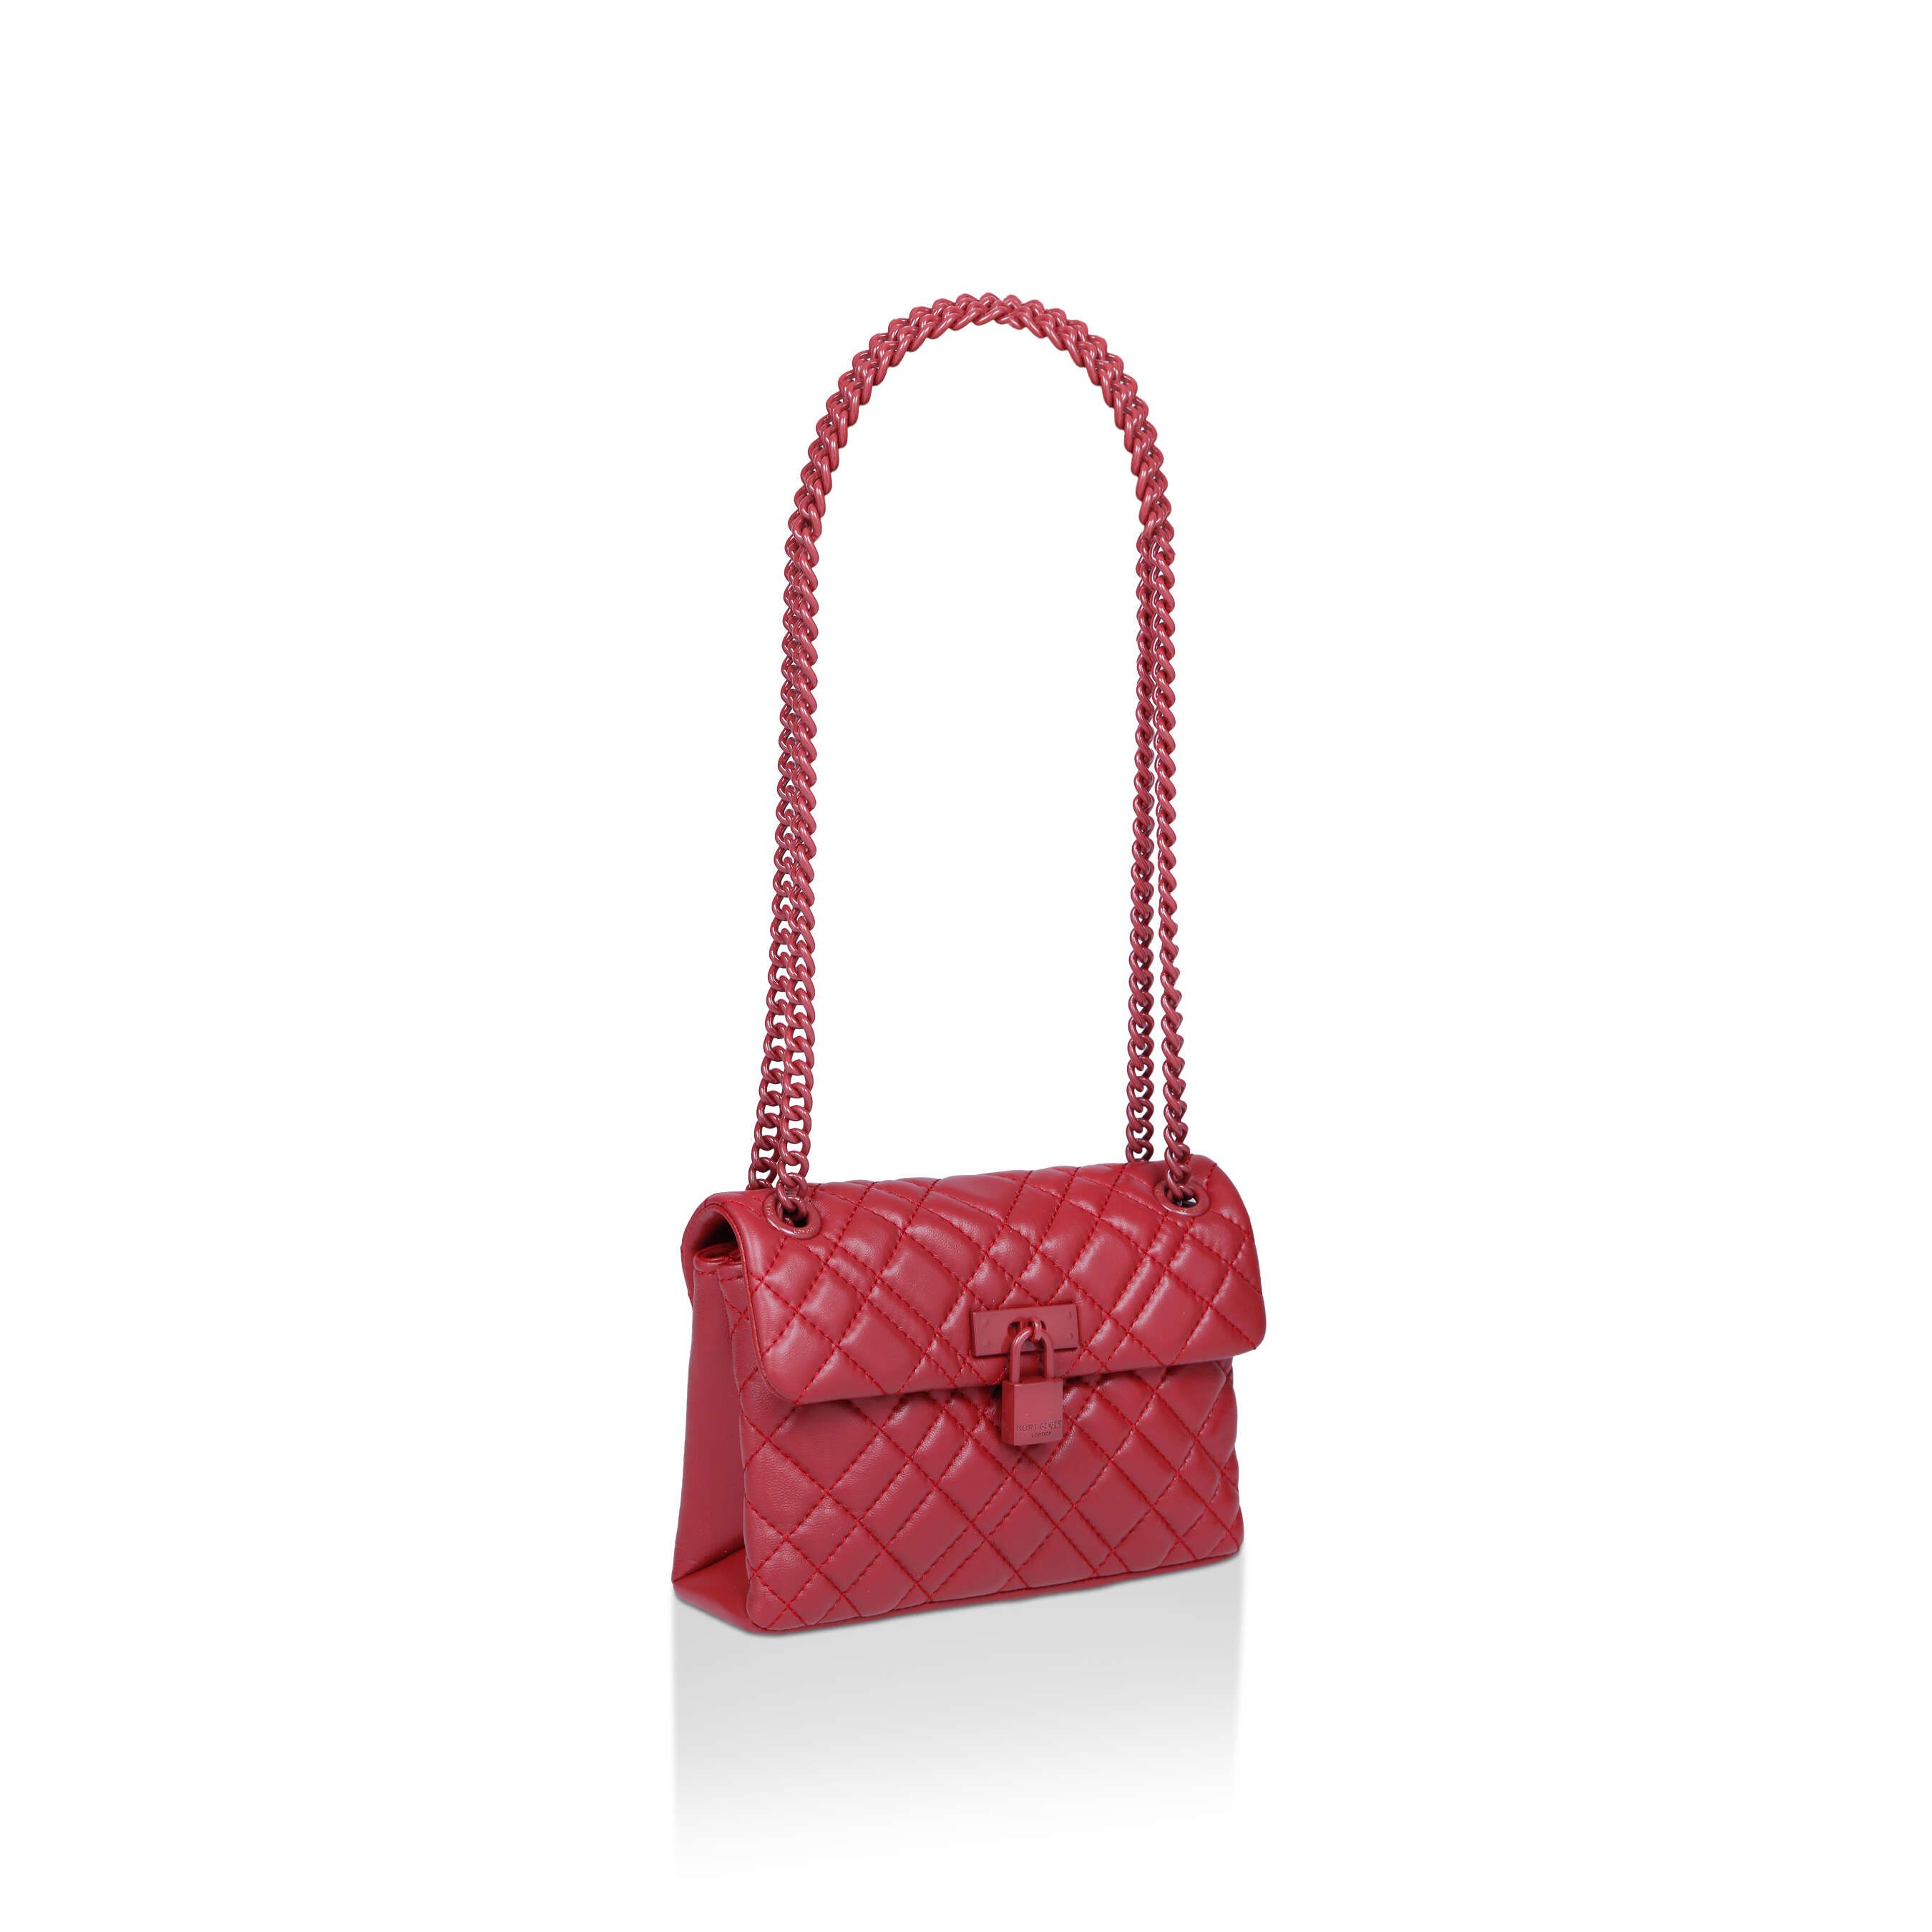 The KGL Mini Brixton Lock Bag is crafted in leather with overstitch quilting design. The wine red lock features branding on the front flap.